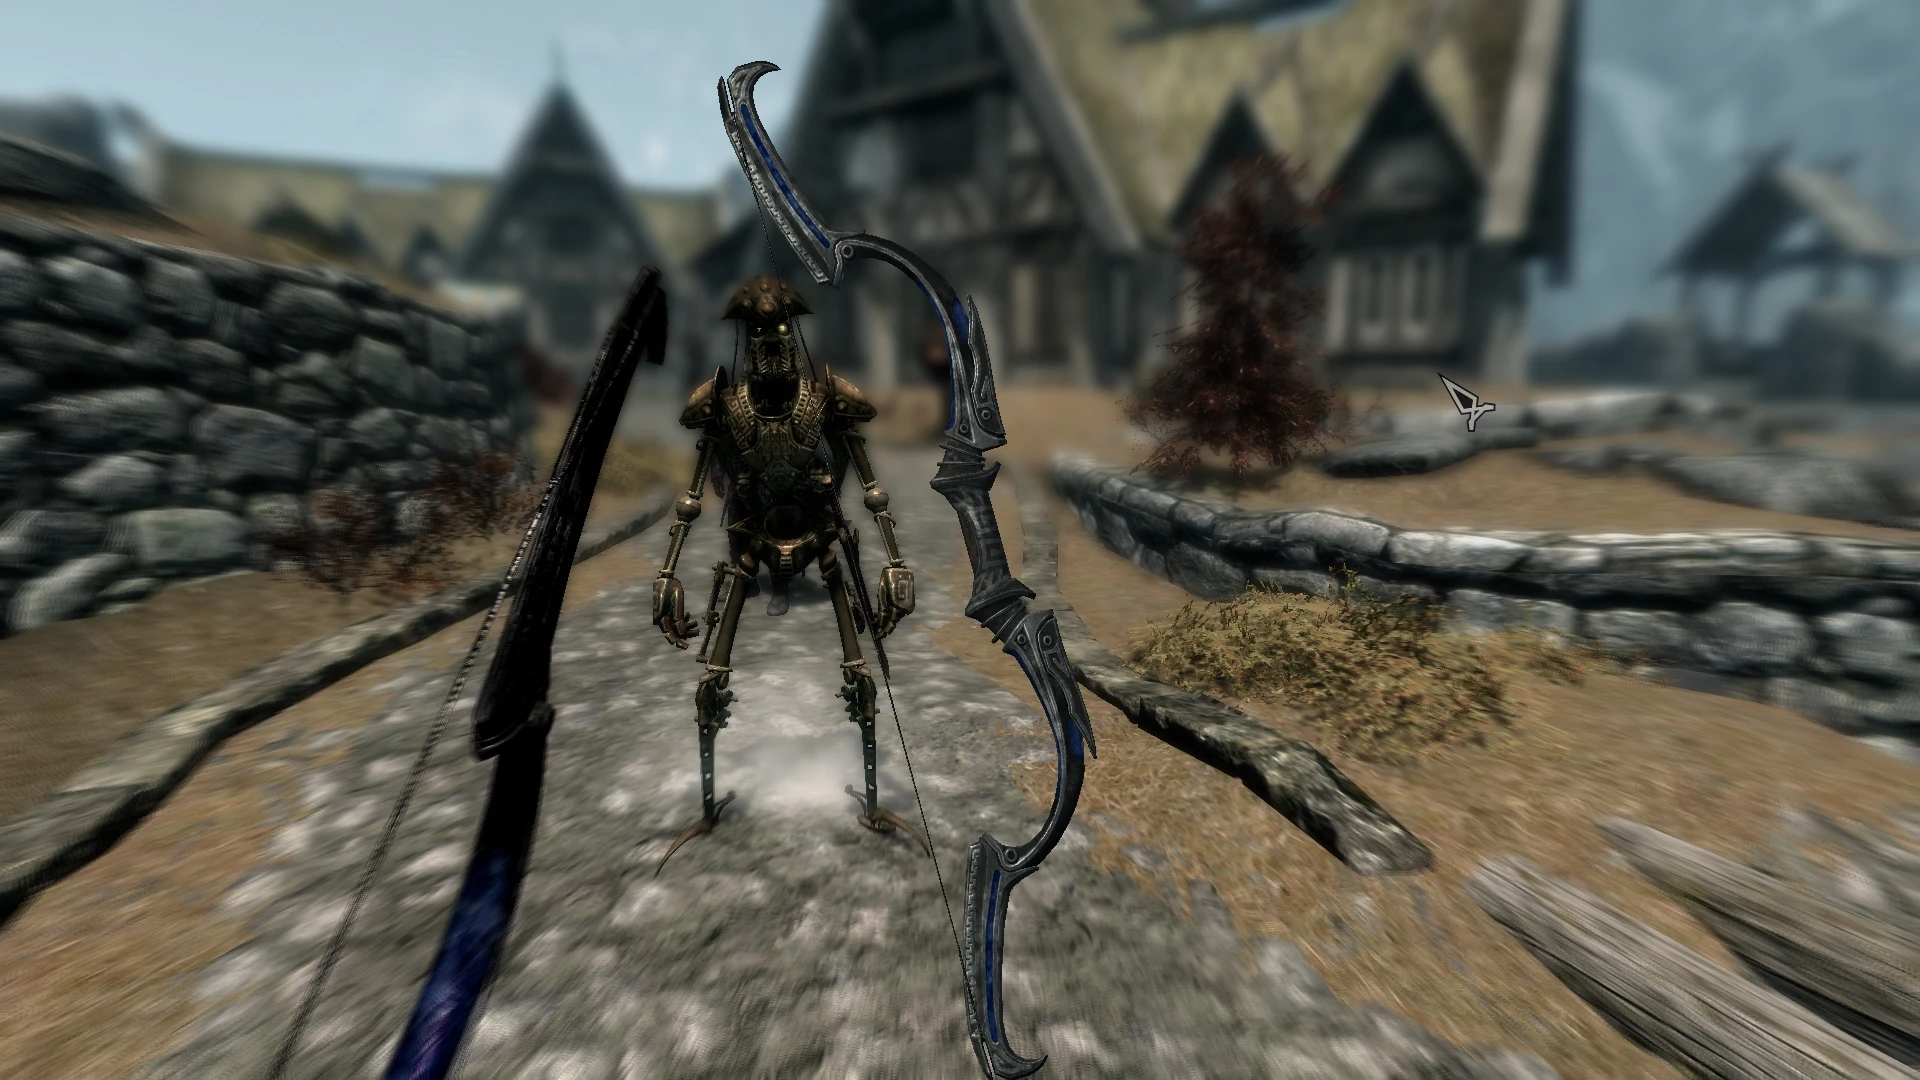 Dwarven Black Bow Of Fate Retexture At Skyrim Nexus Mods And Community.